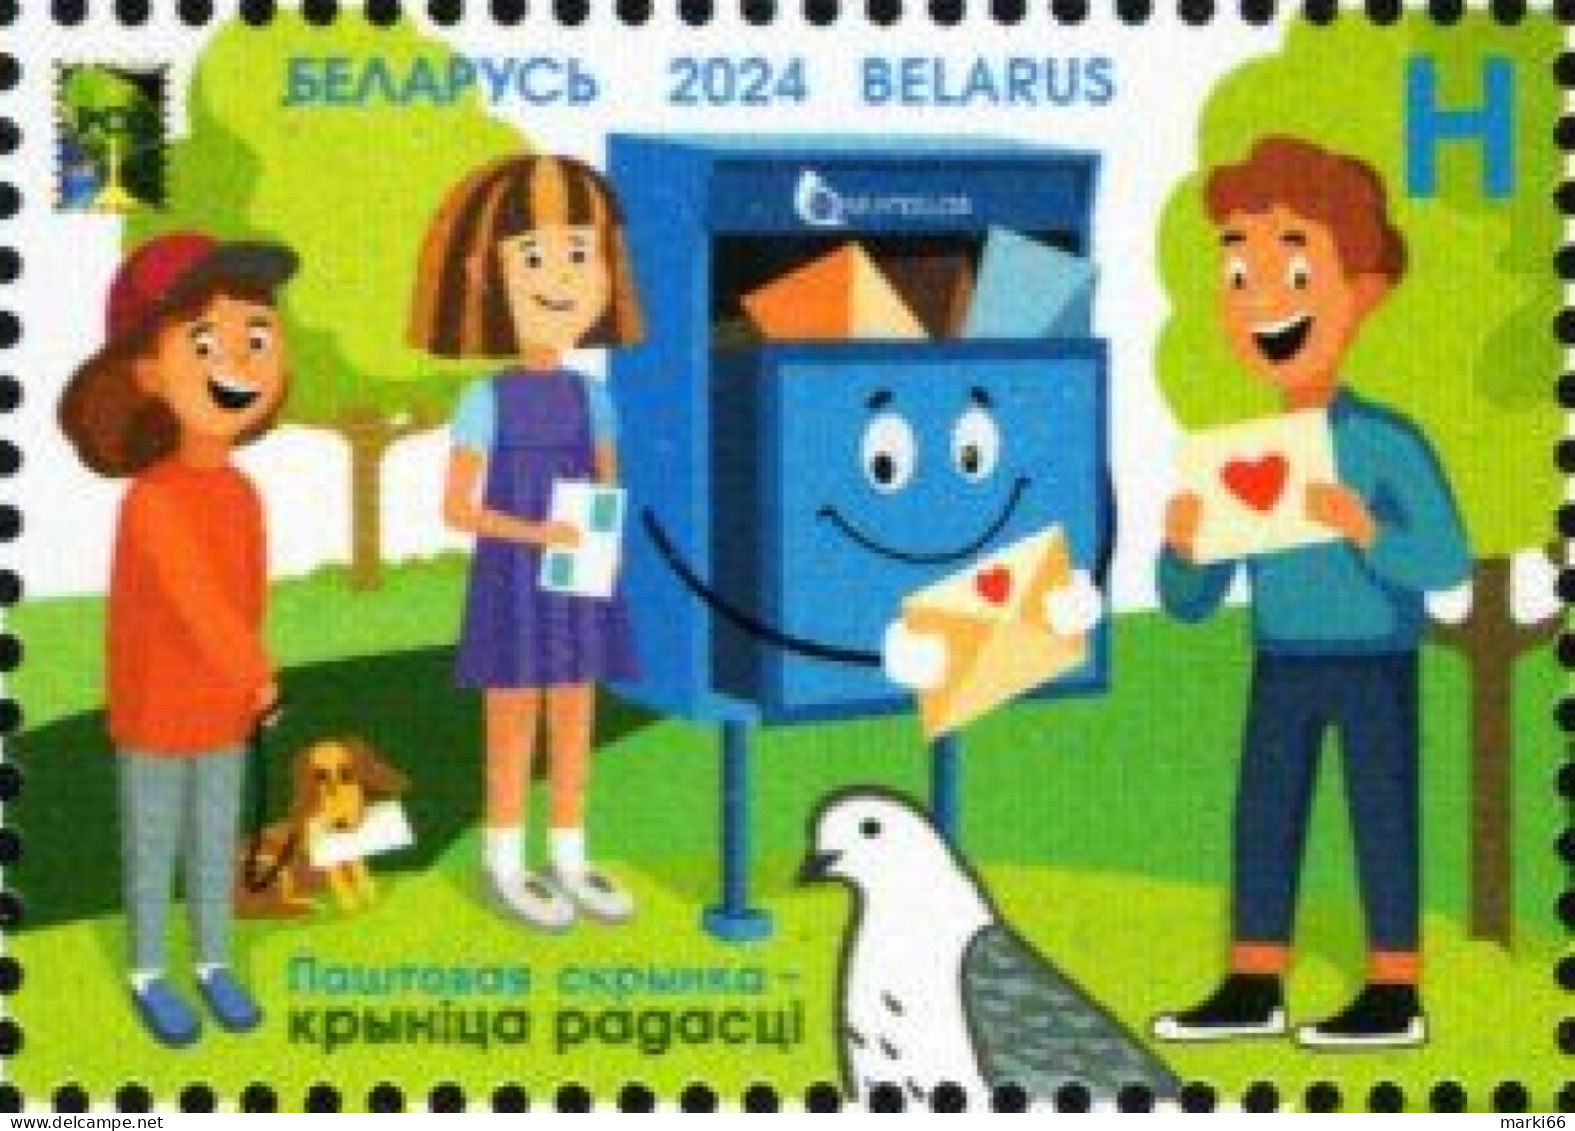 Belarus - 2024 - Postboxes - RCC Common Issue - Mint Stamp - Wit-Rusland